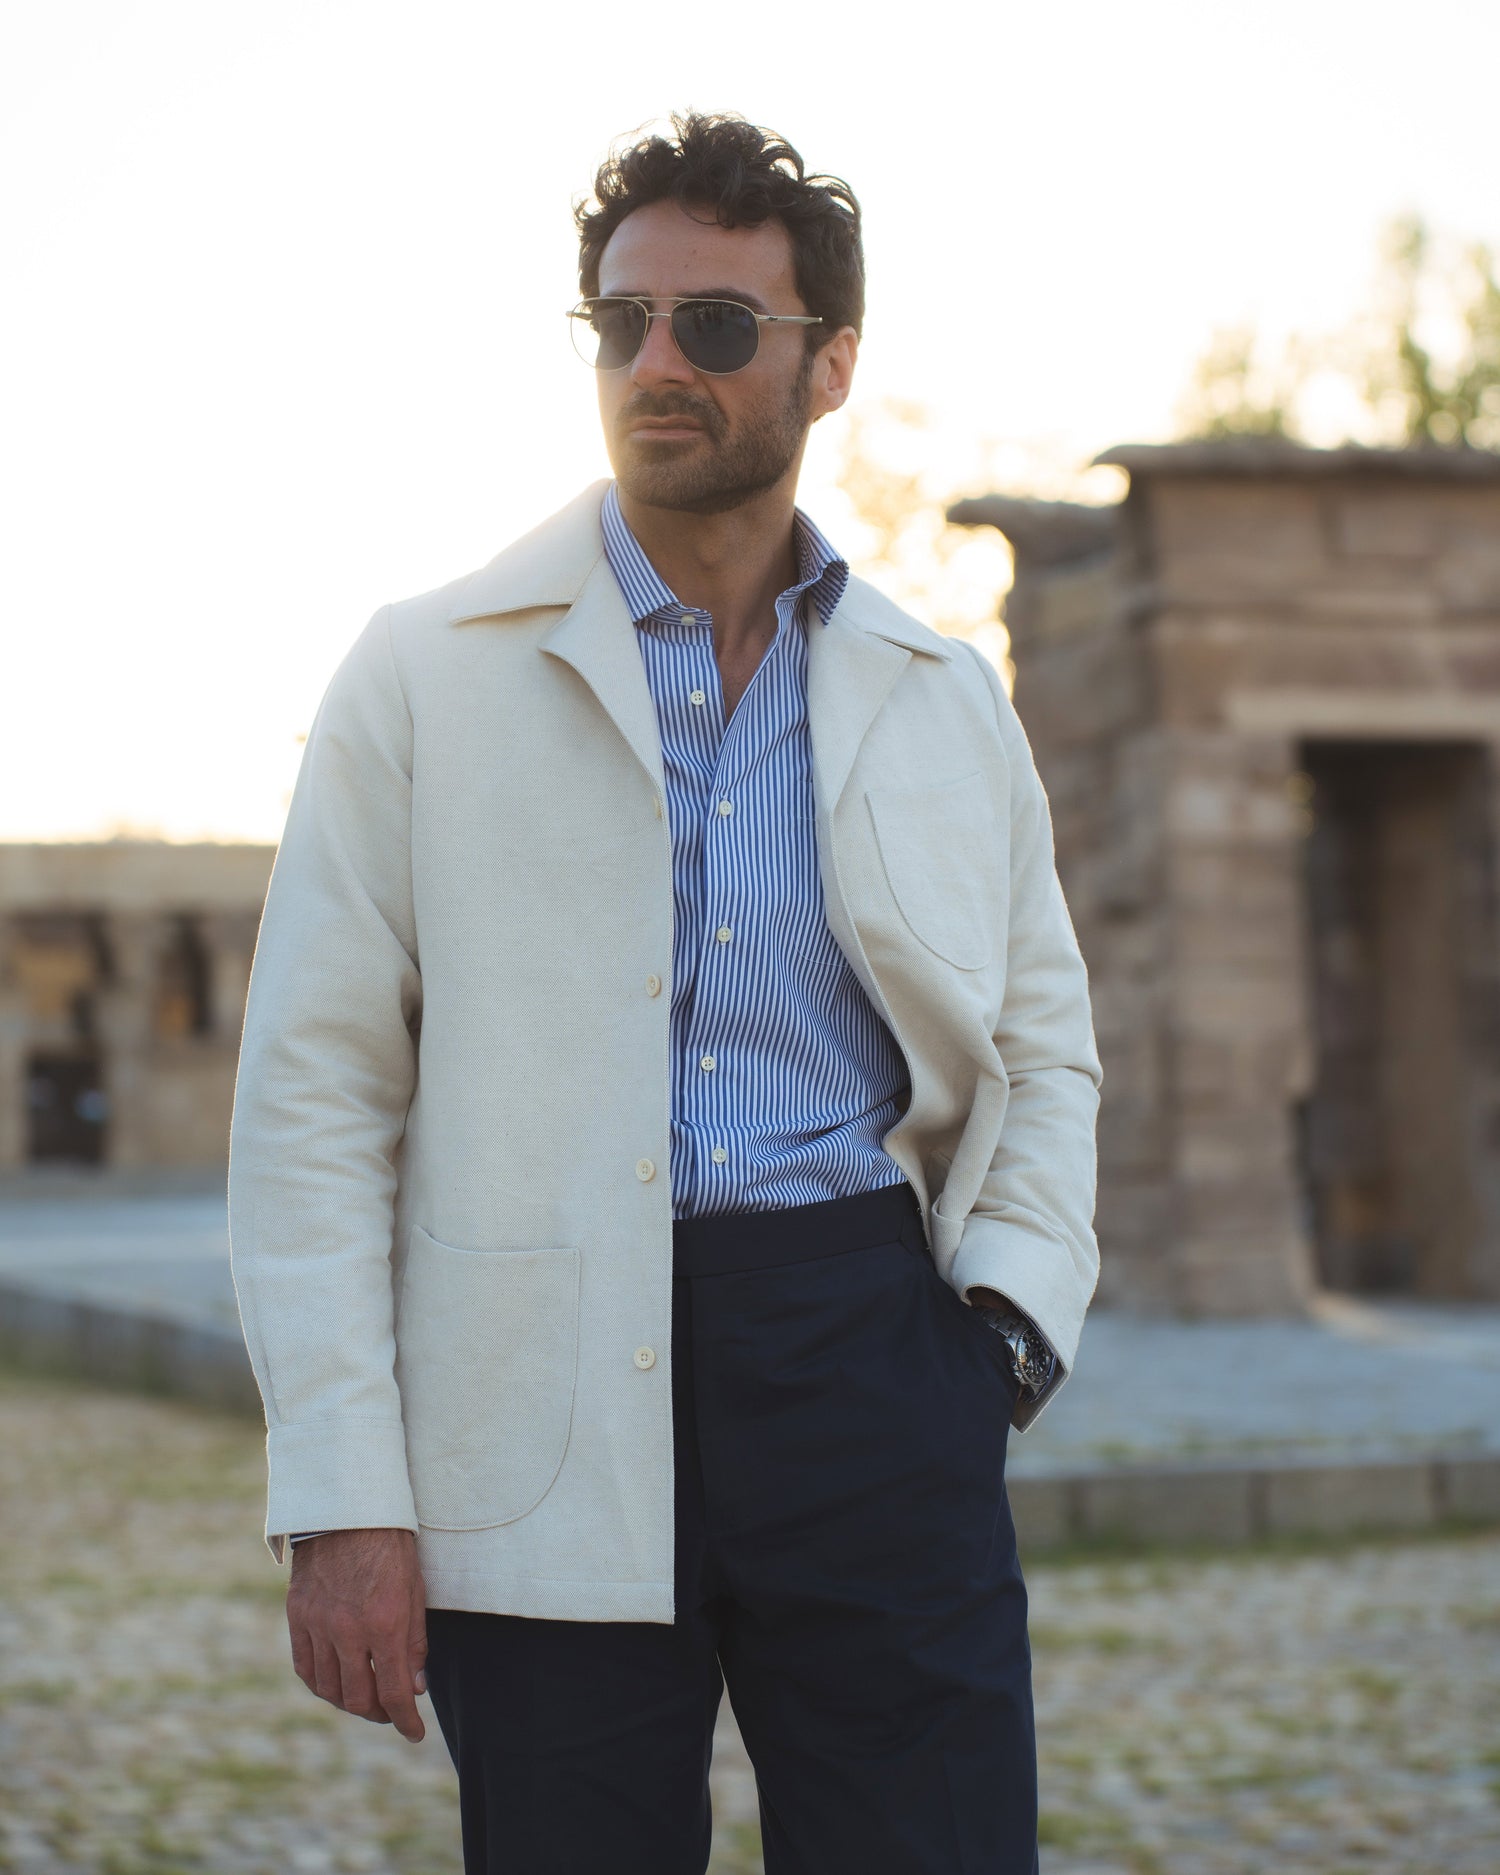 Model outside wearing the linen shirt jacket for men by Luxire in cream wearing sunglasses one hand in pocket